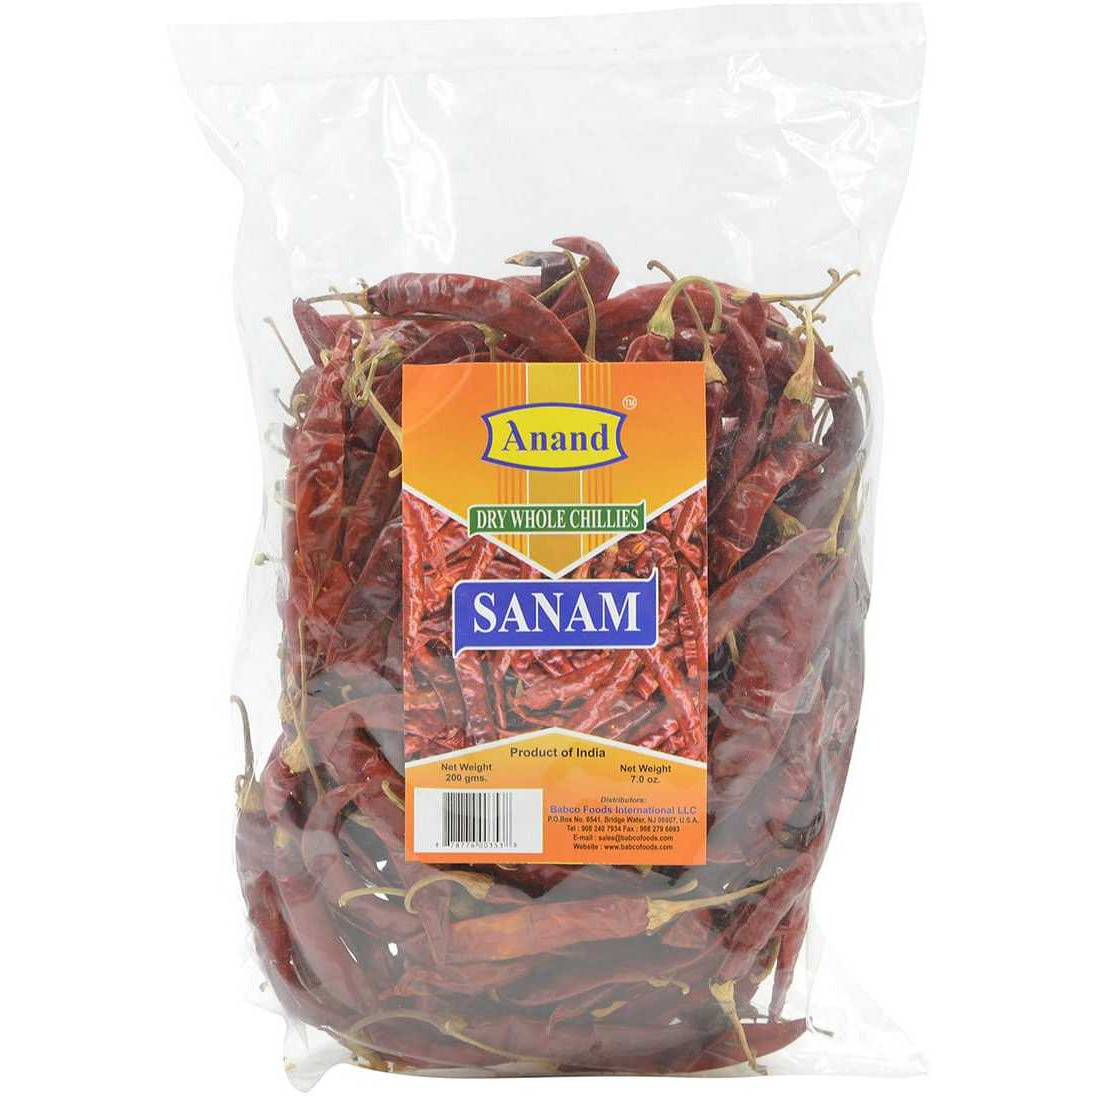 Pack of 2 - Anand Dry Whole Chillies Sanam - 7 Oz (200 Gm)